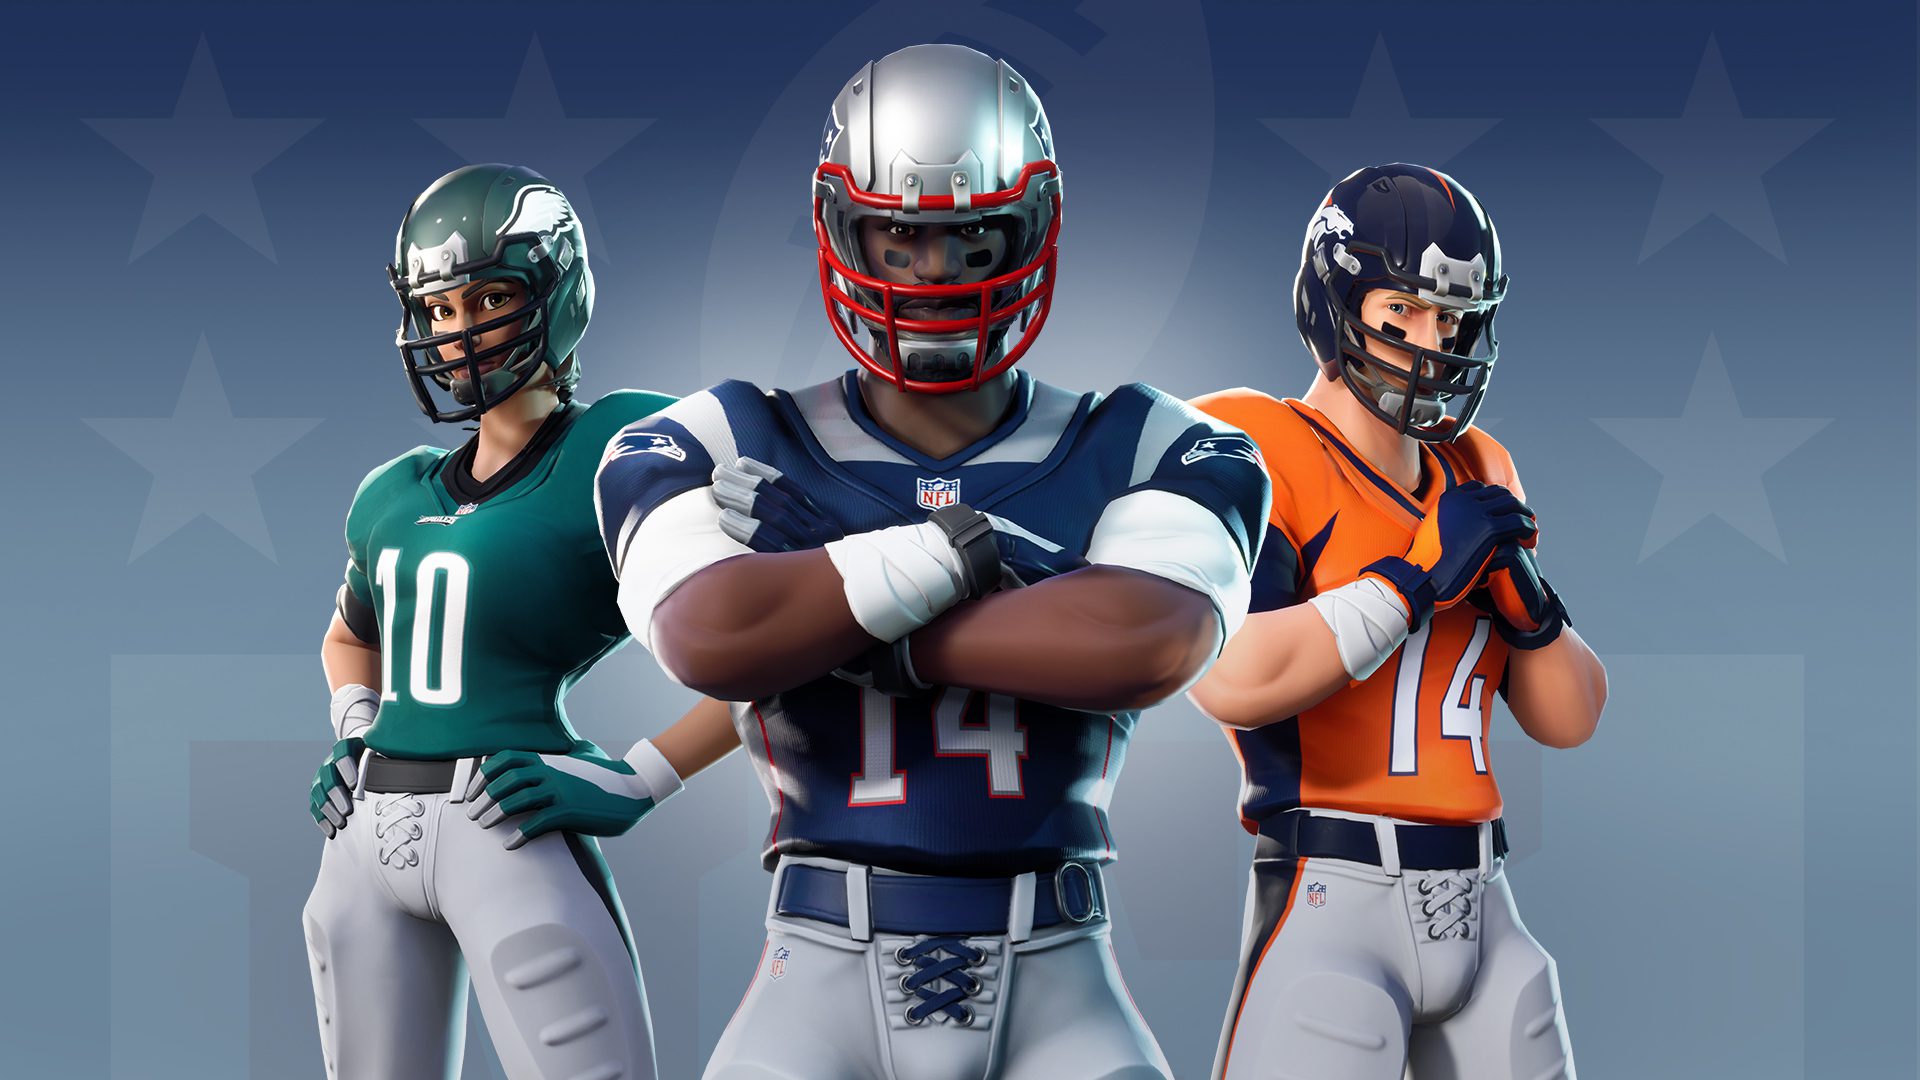 NFL/Fortnite Team Up To Dress Your Characters As Your Favorite Team